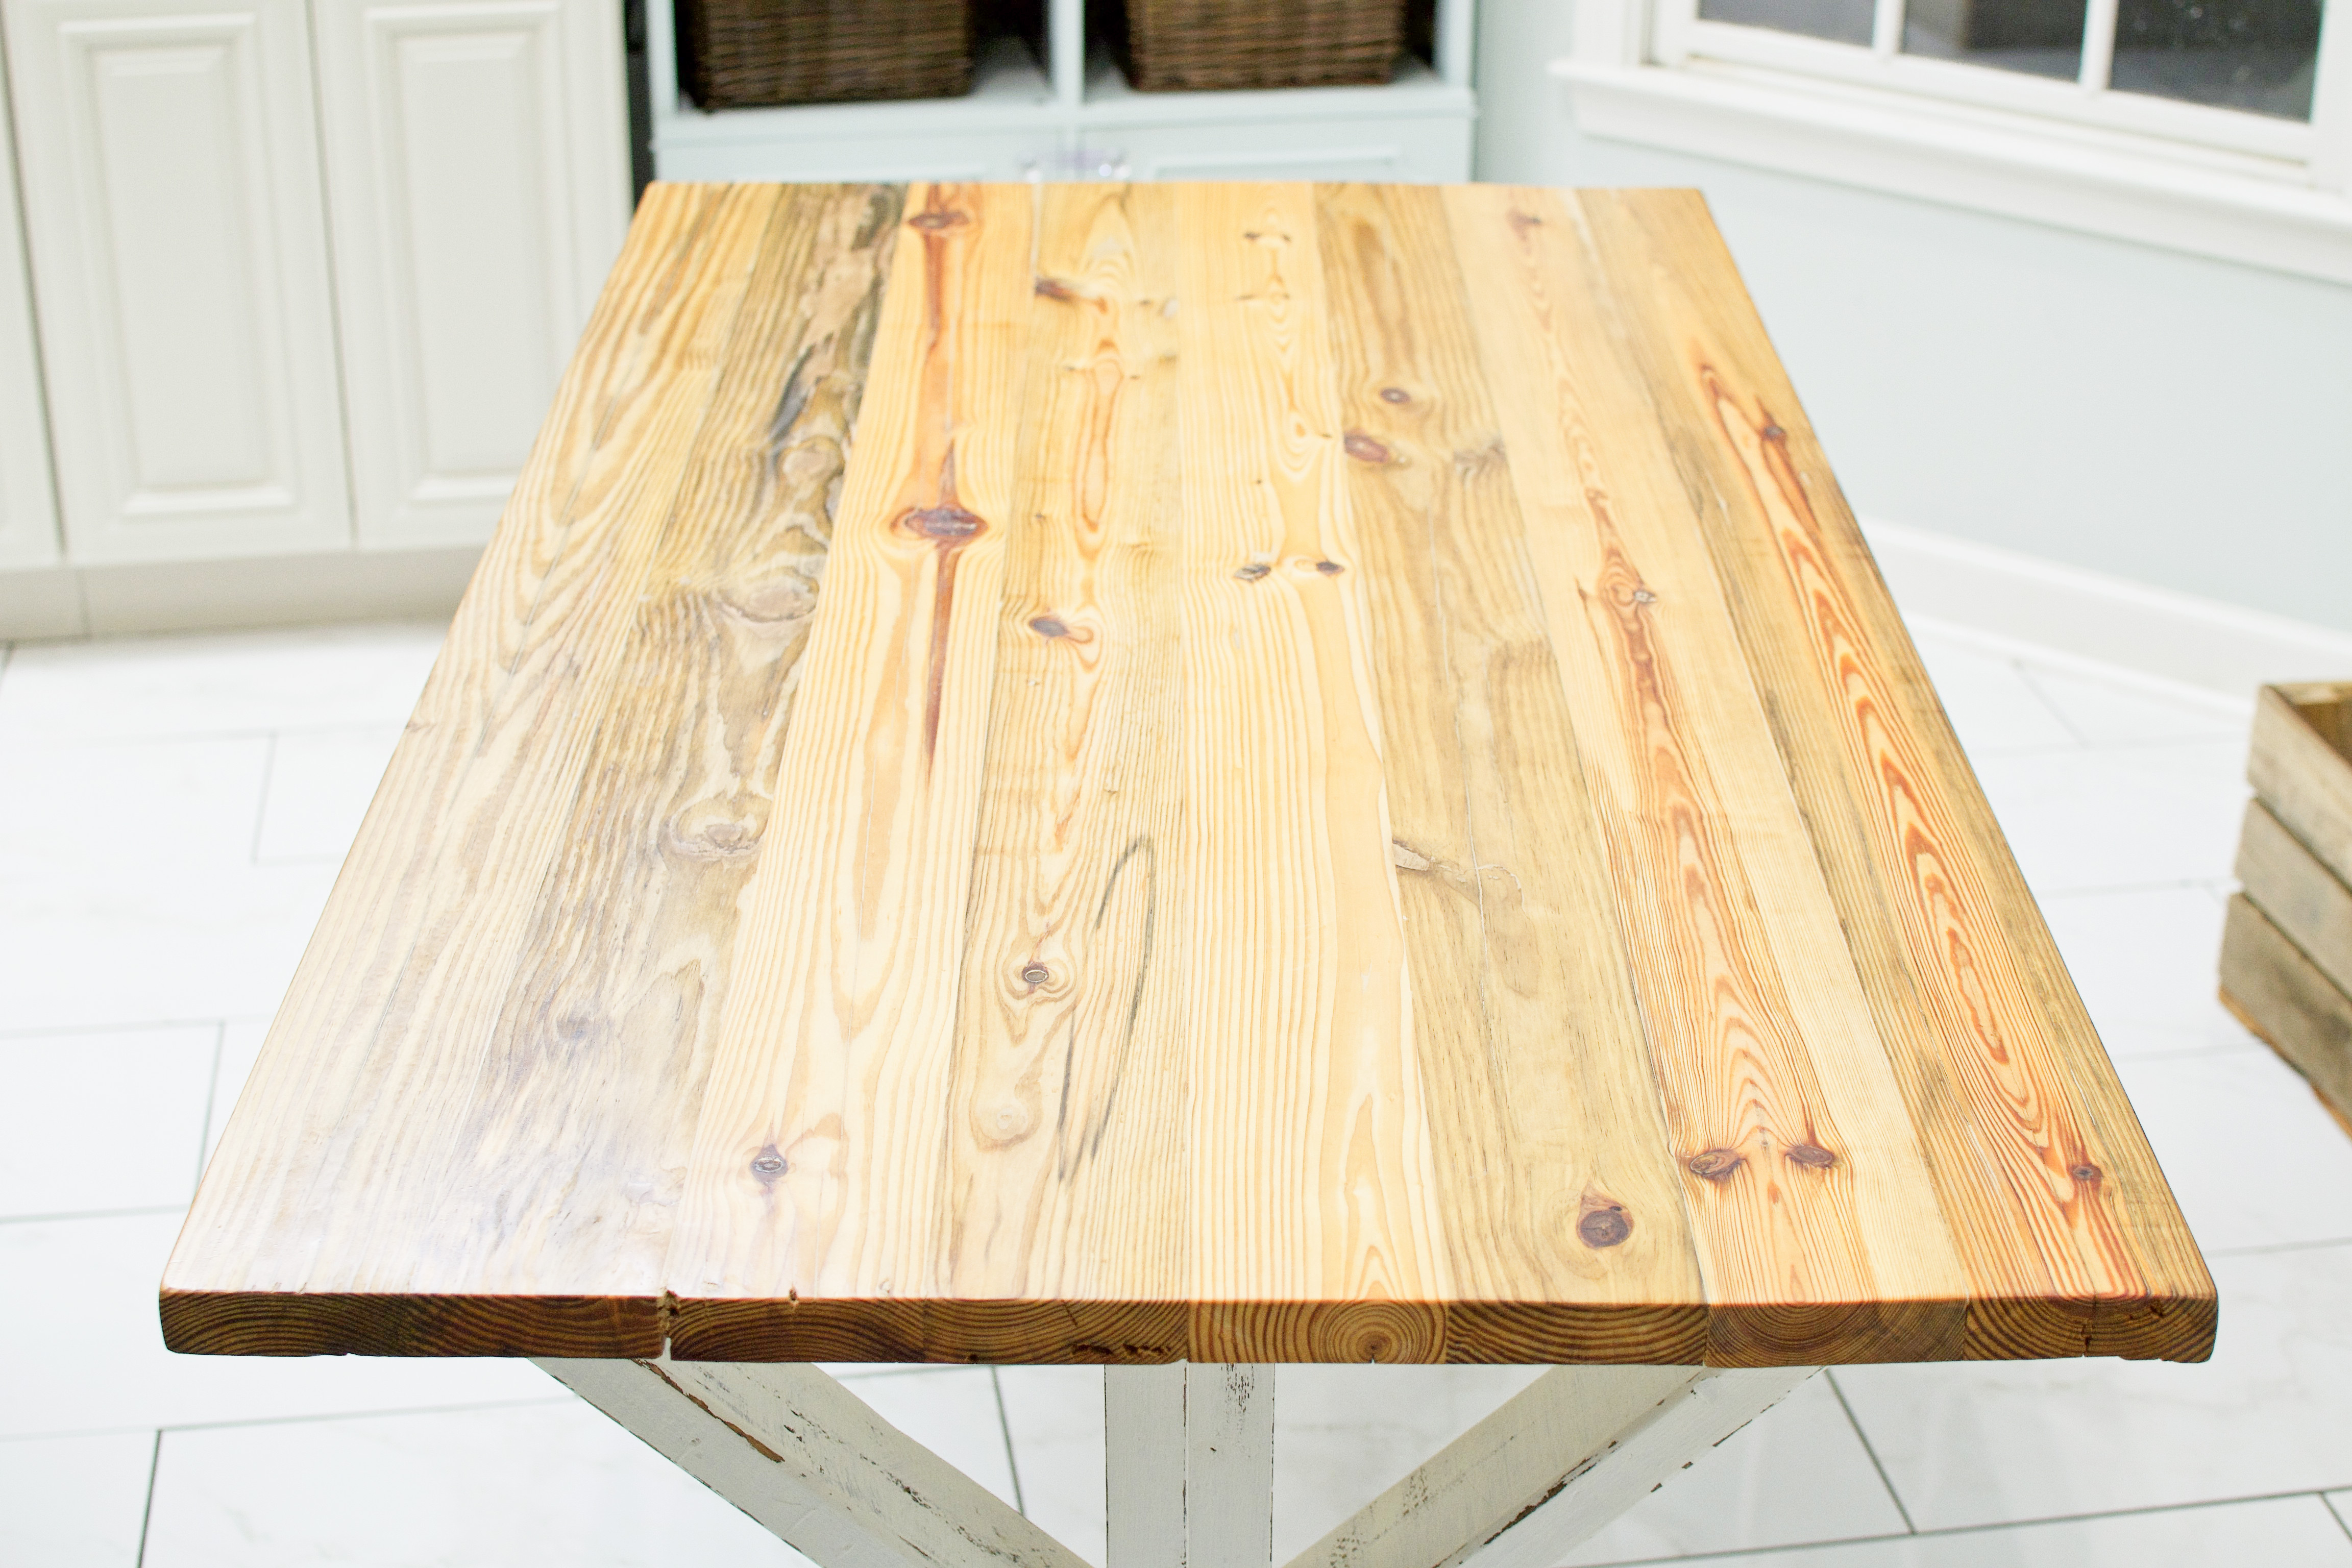 How I apply boiled linseed oil on my mahogany coffee table, DIY